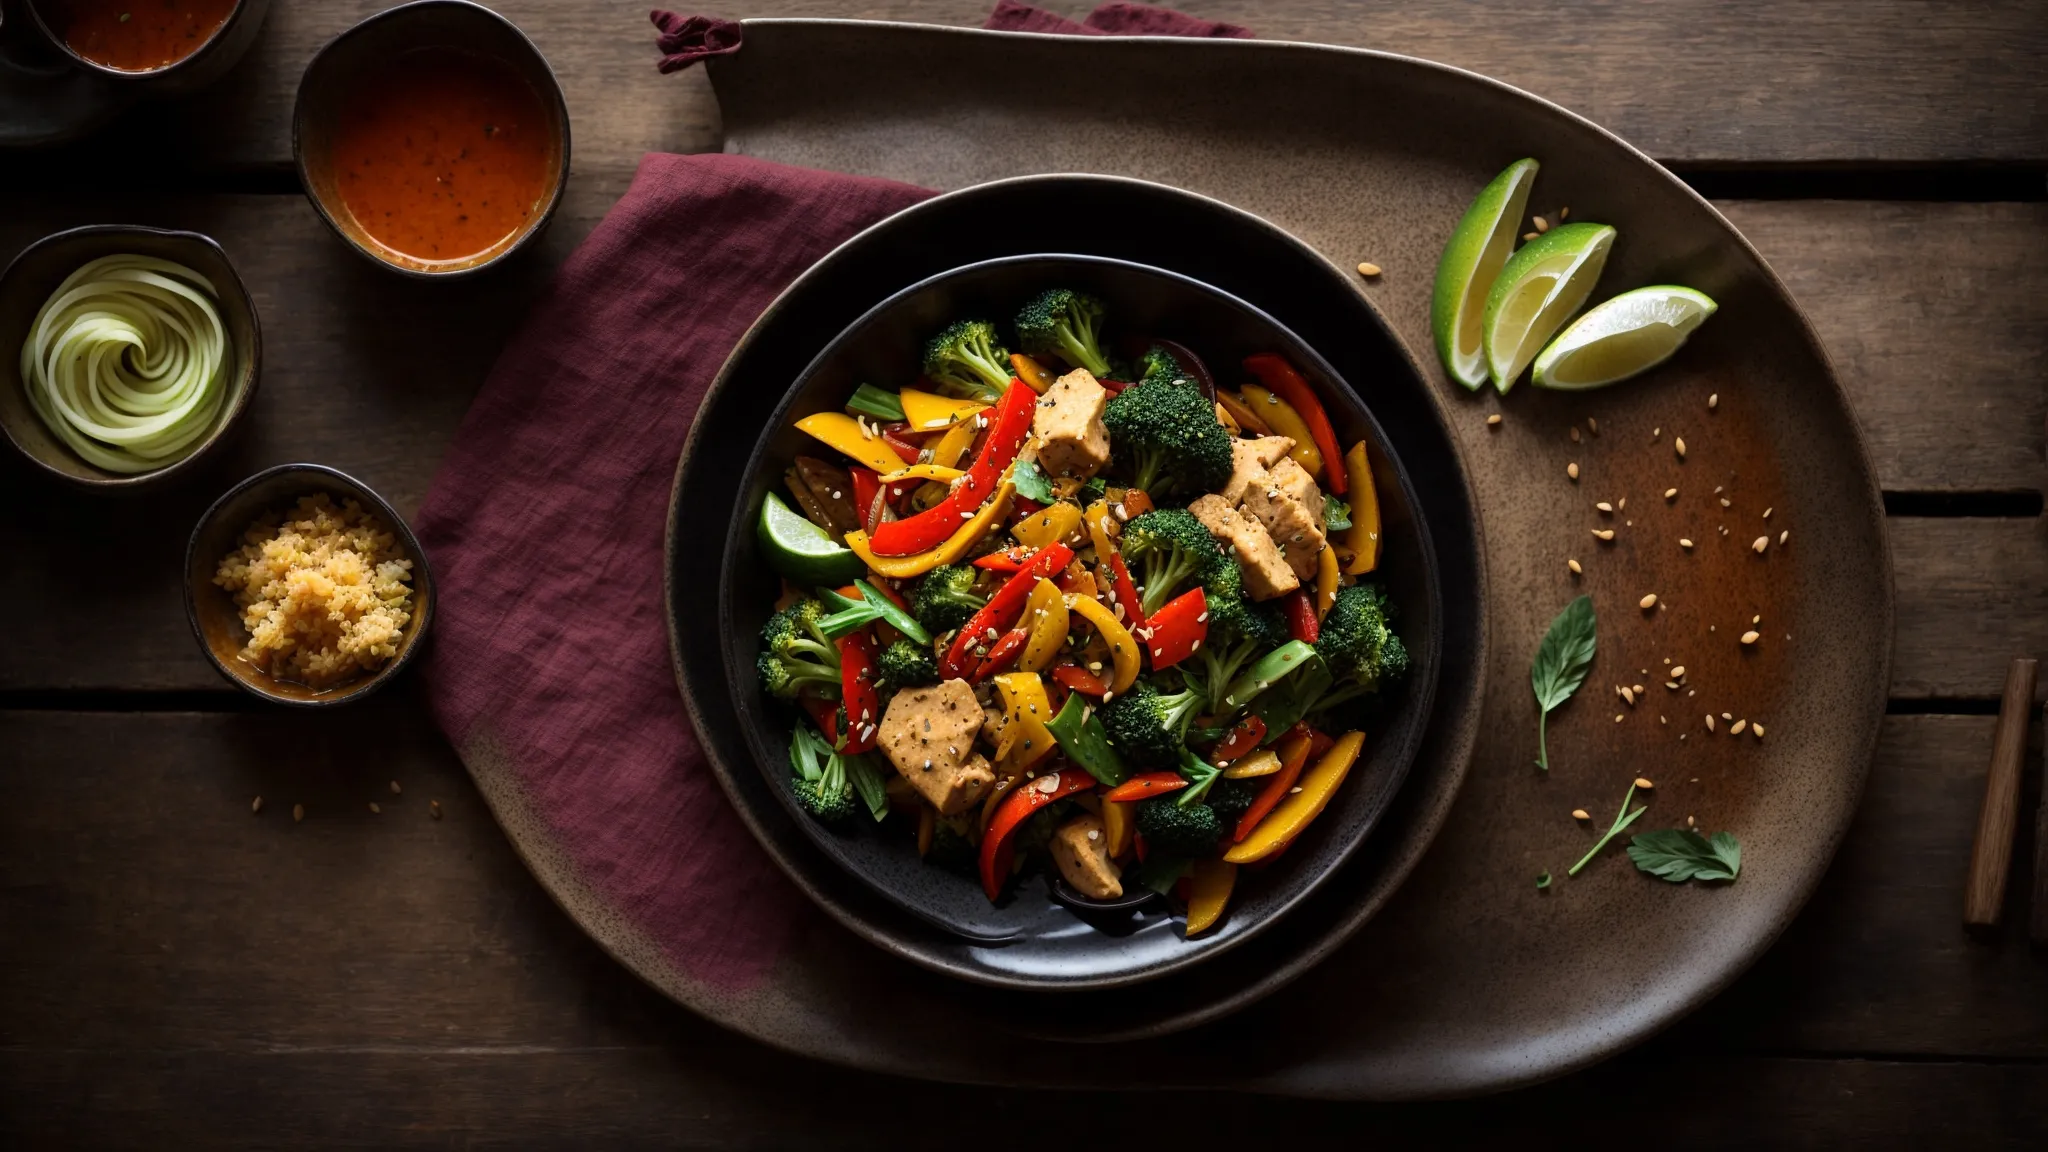 a vibrant dish of colorful stir-fry sits amidst a rustic table setting, steam wafting up invitingly.